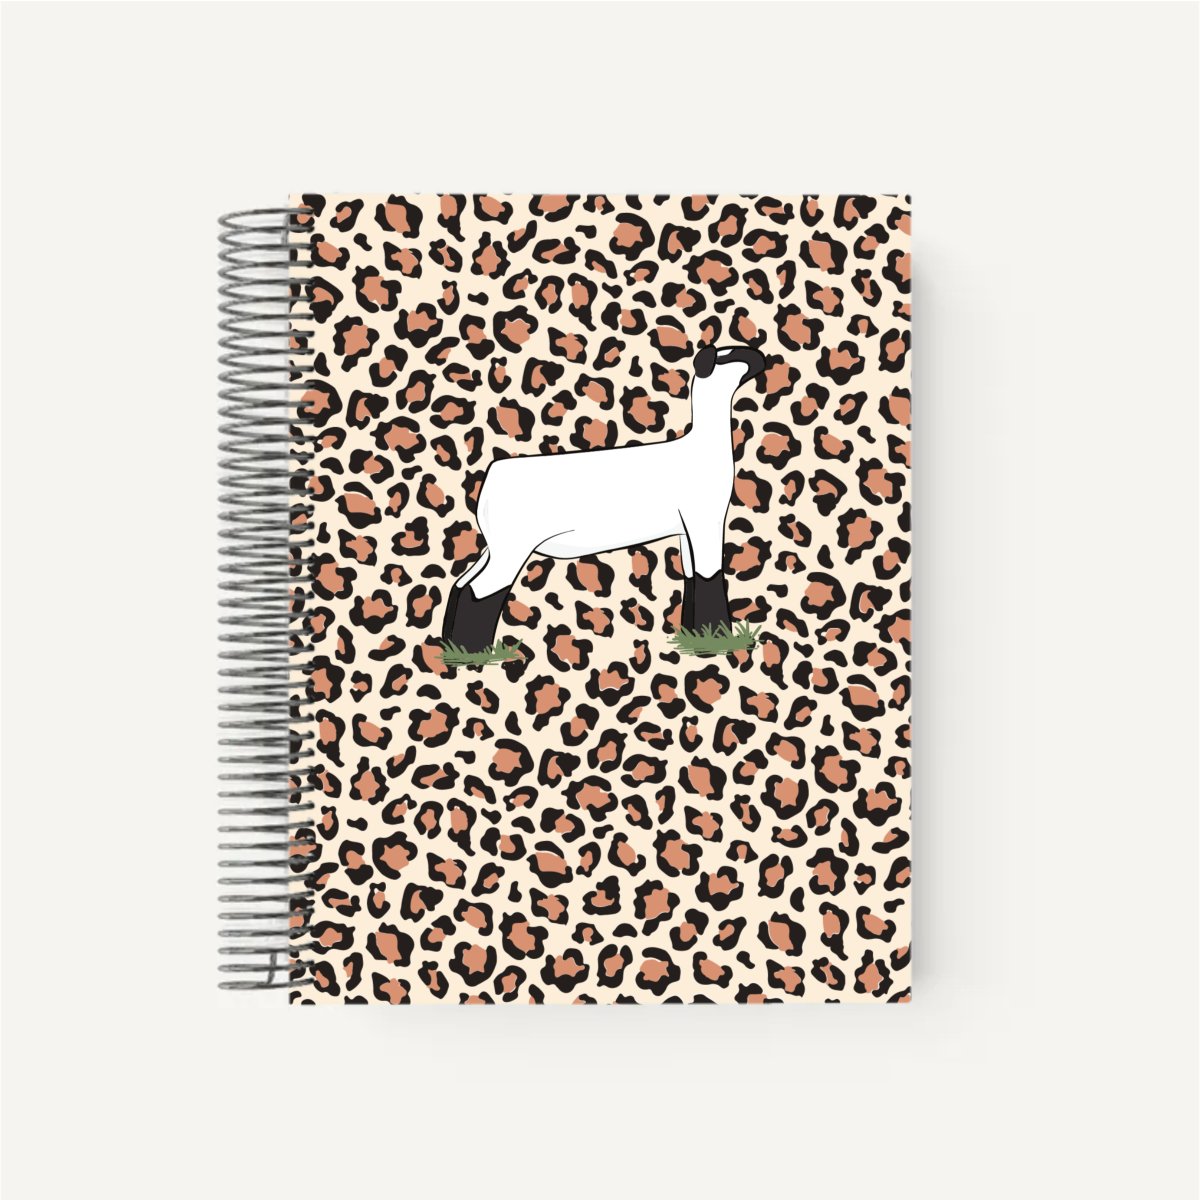 Personalized-Livestock-Lambing Record Planner - Cheetah Cover